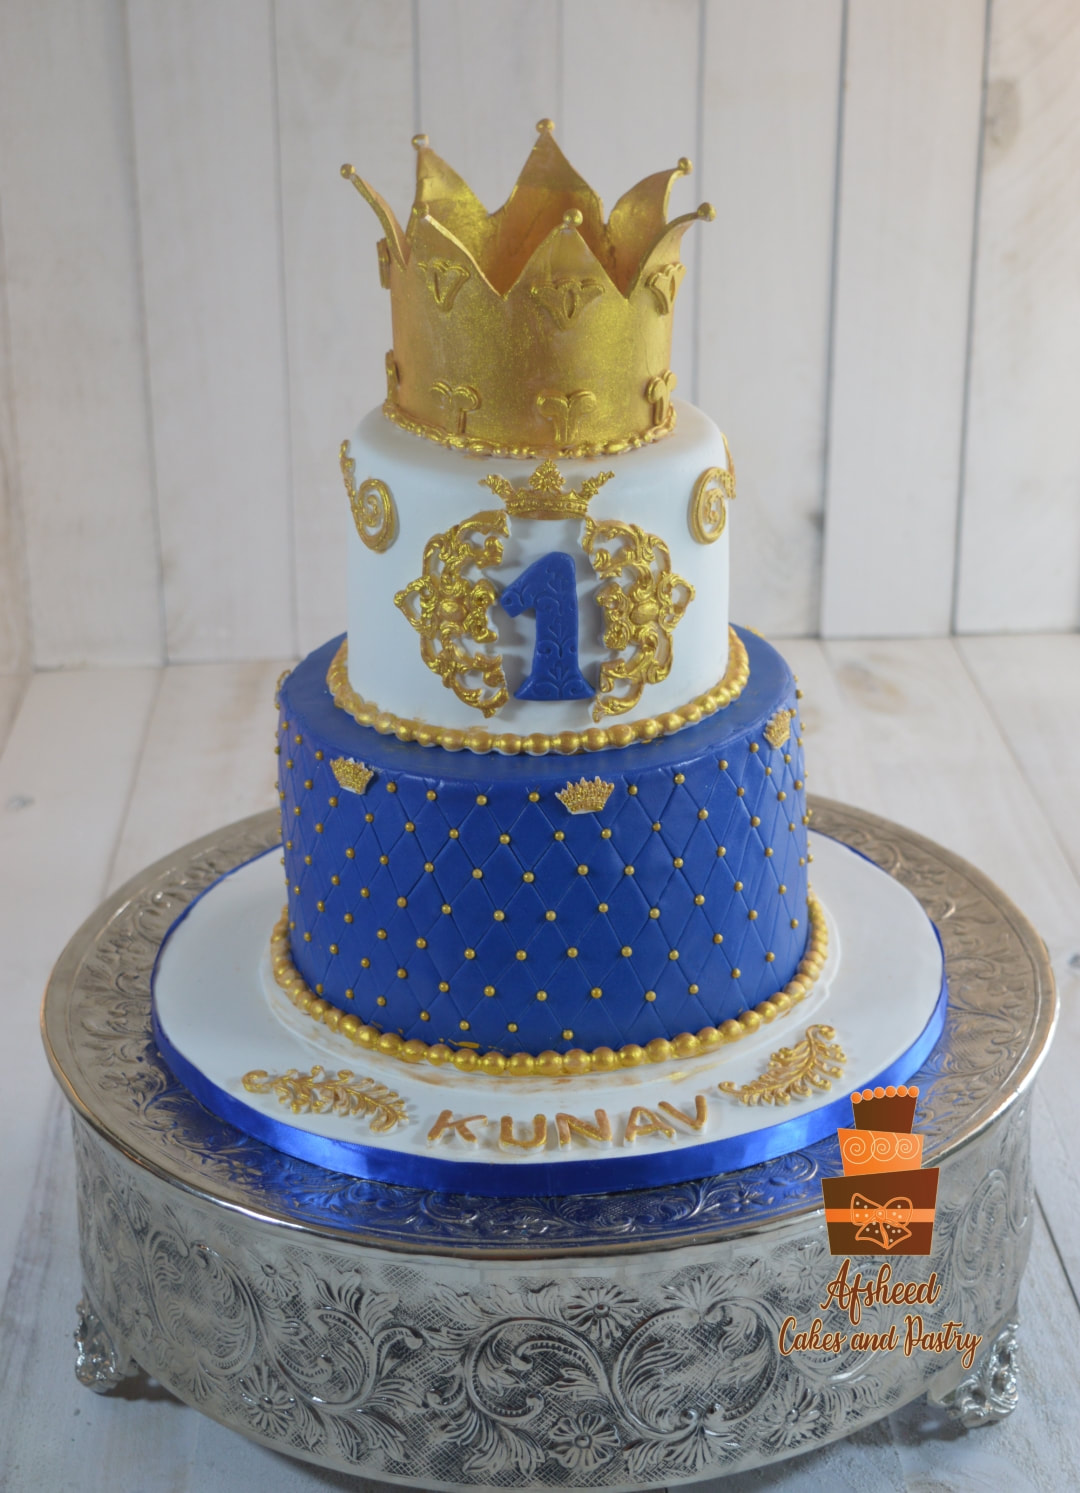 Frozen Theme Cake with White Chocolate, Royal Icing